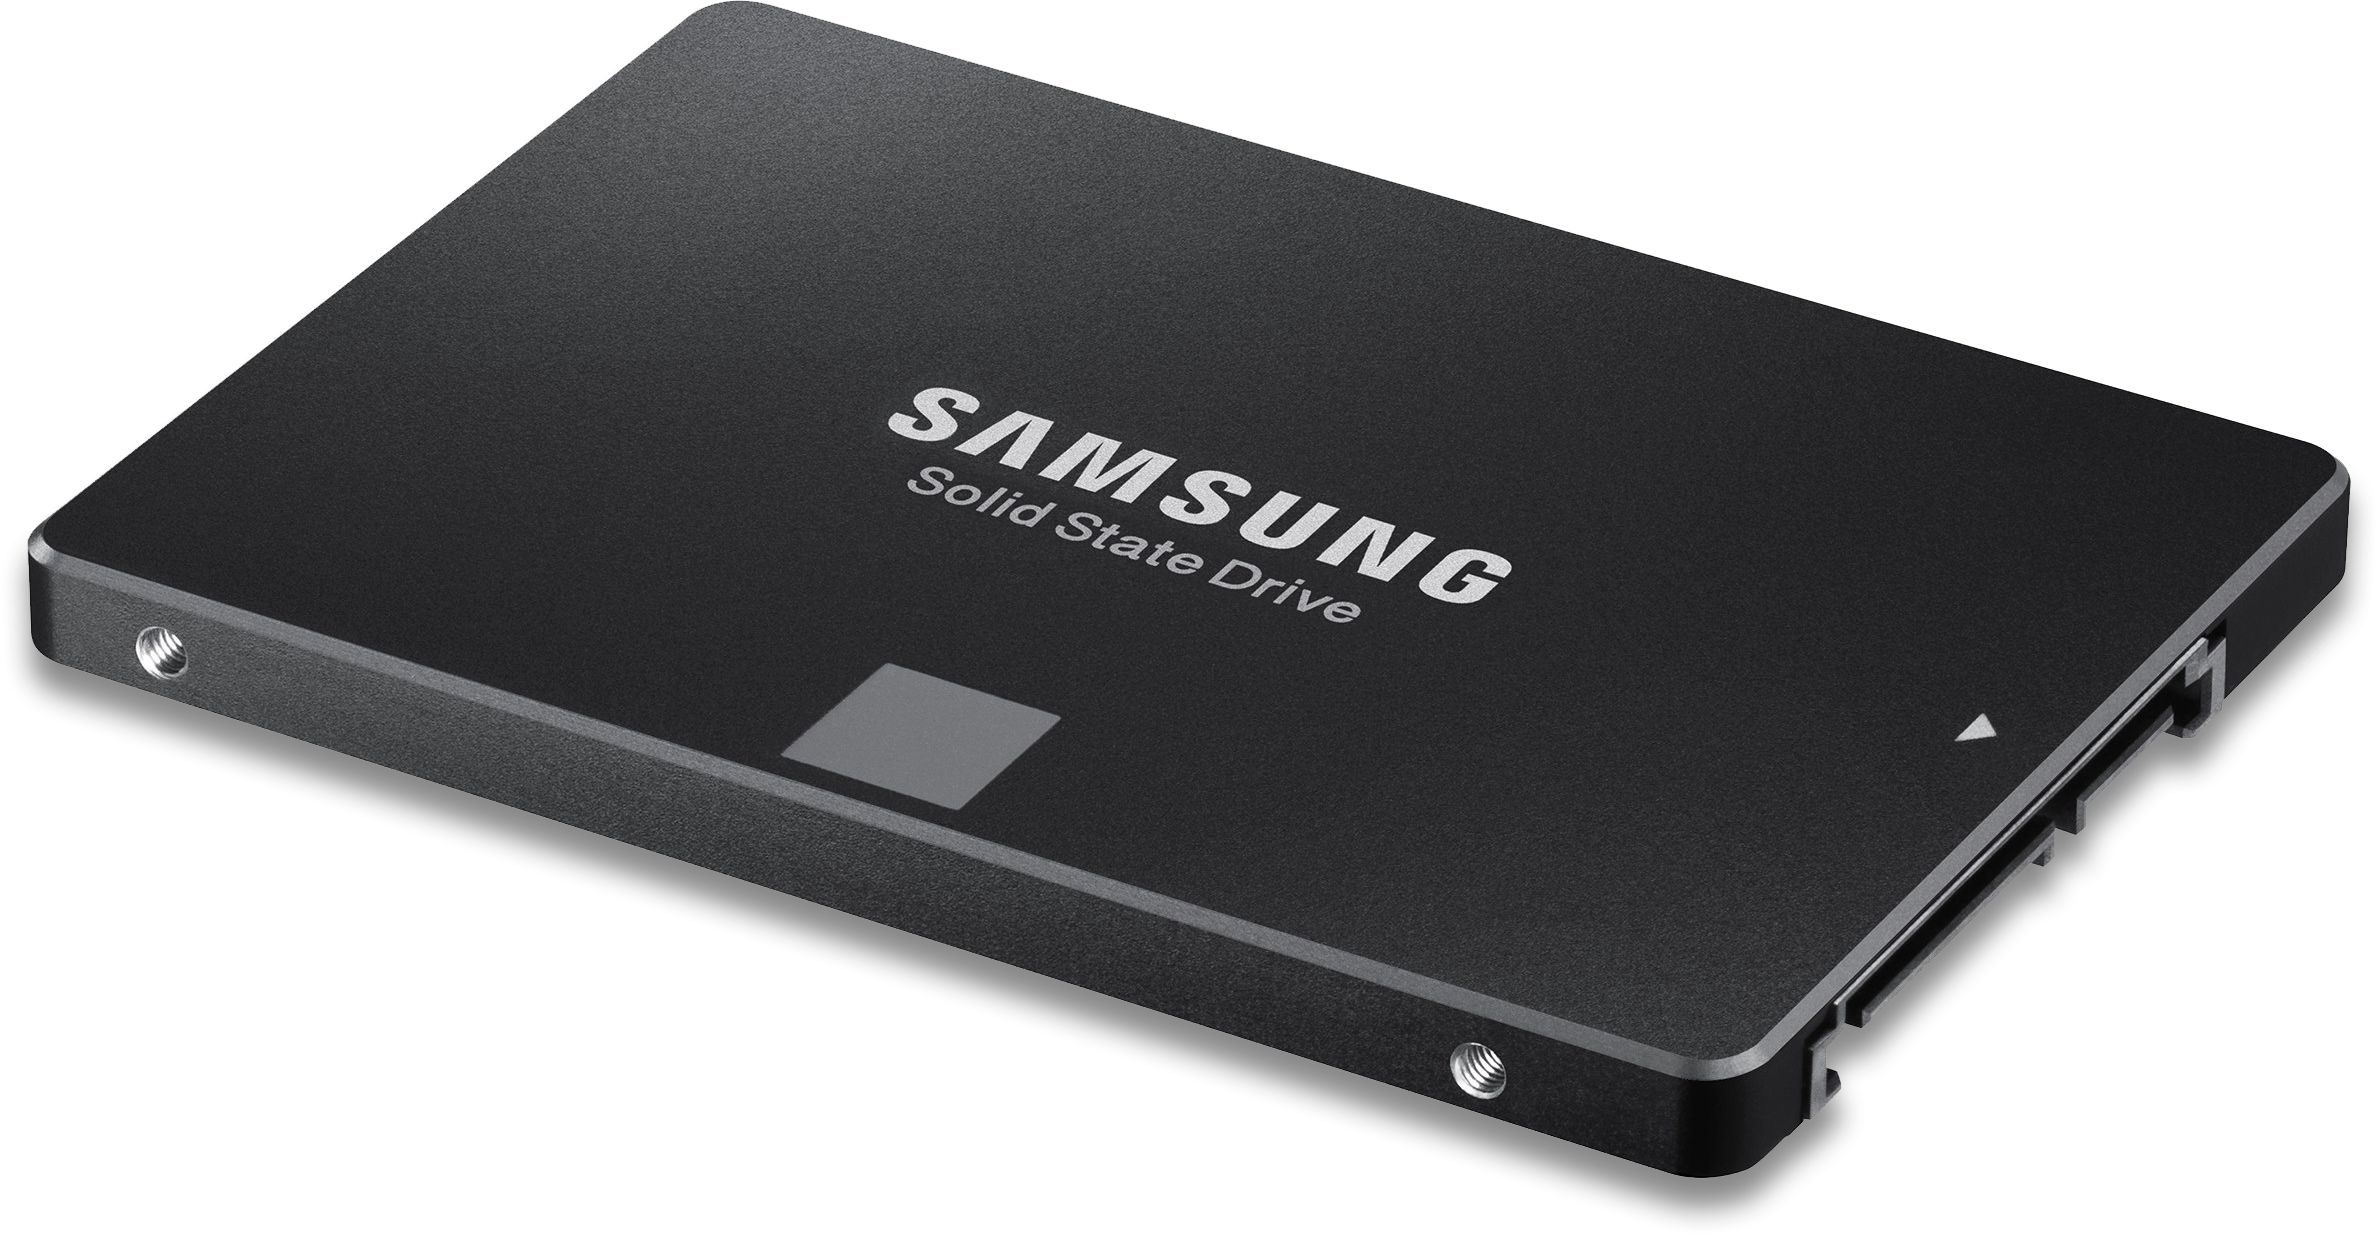 Samsung 850 EVO Solid State Drives